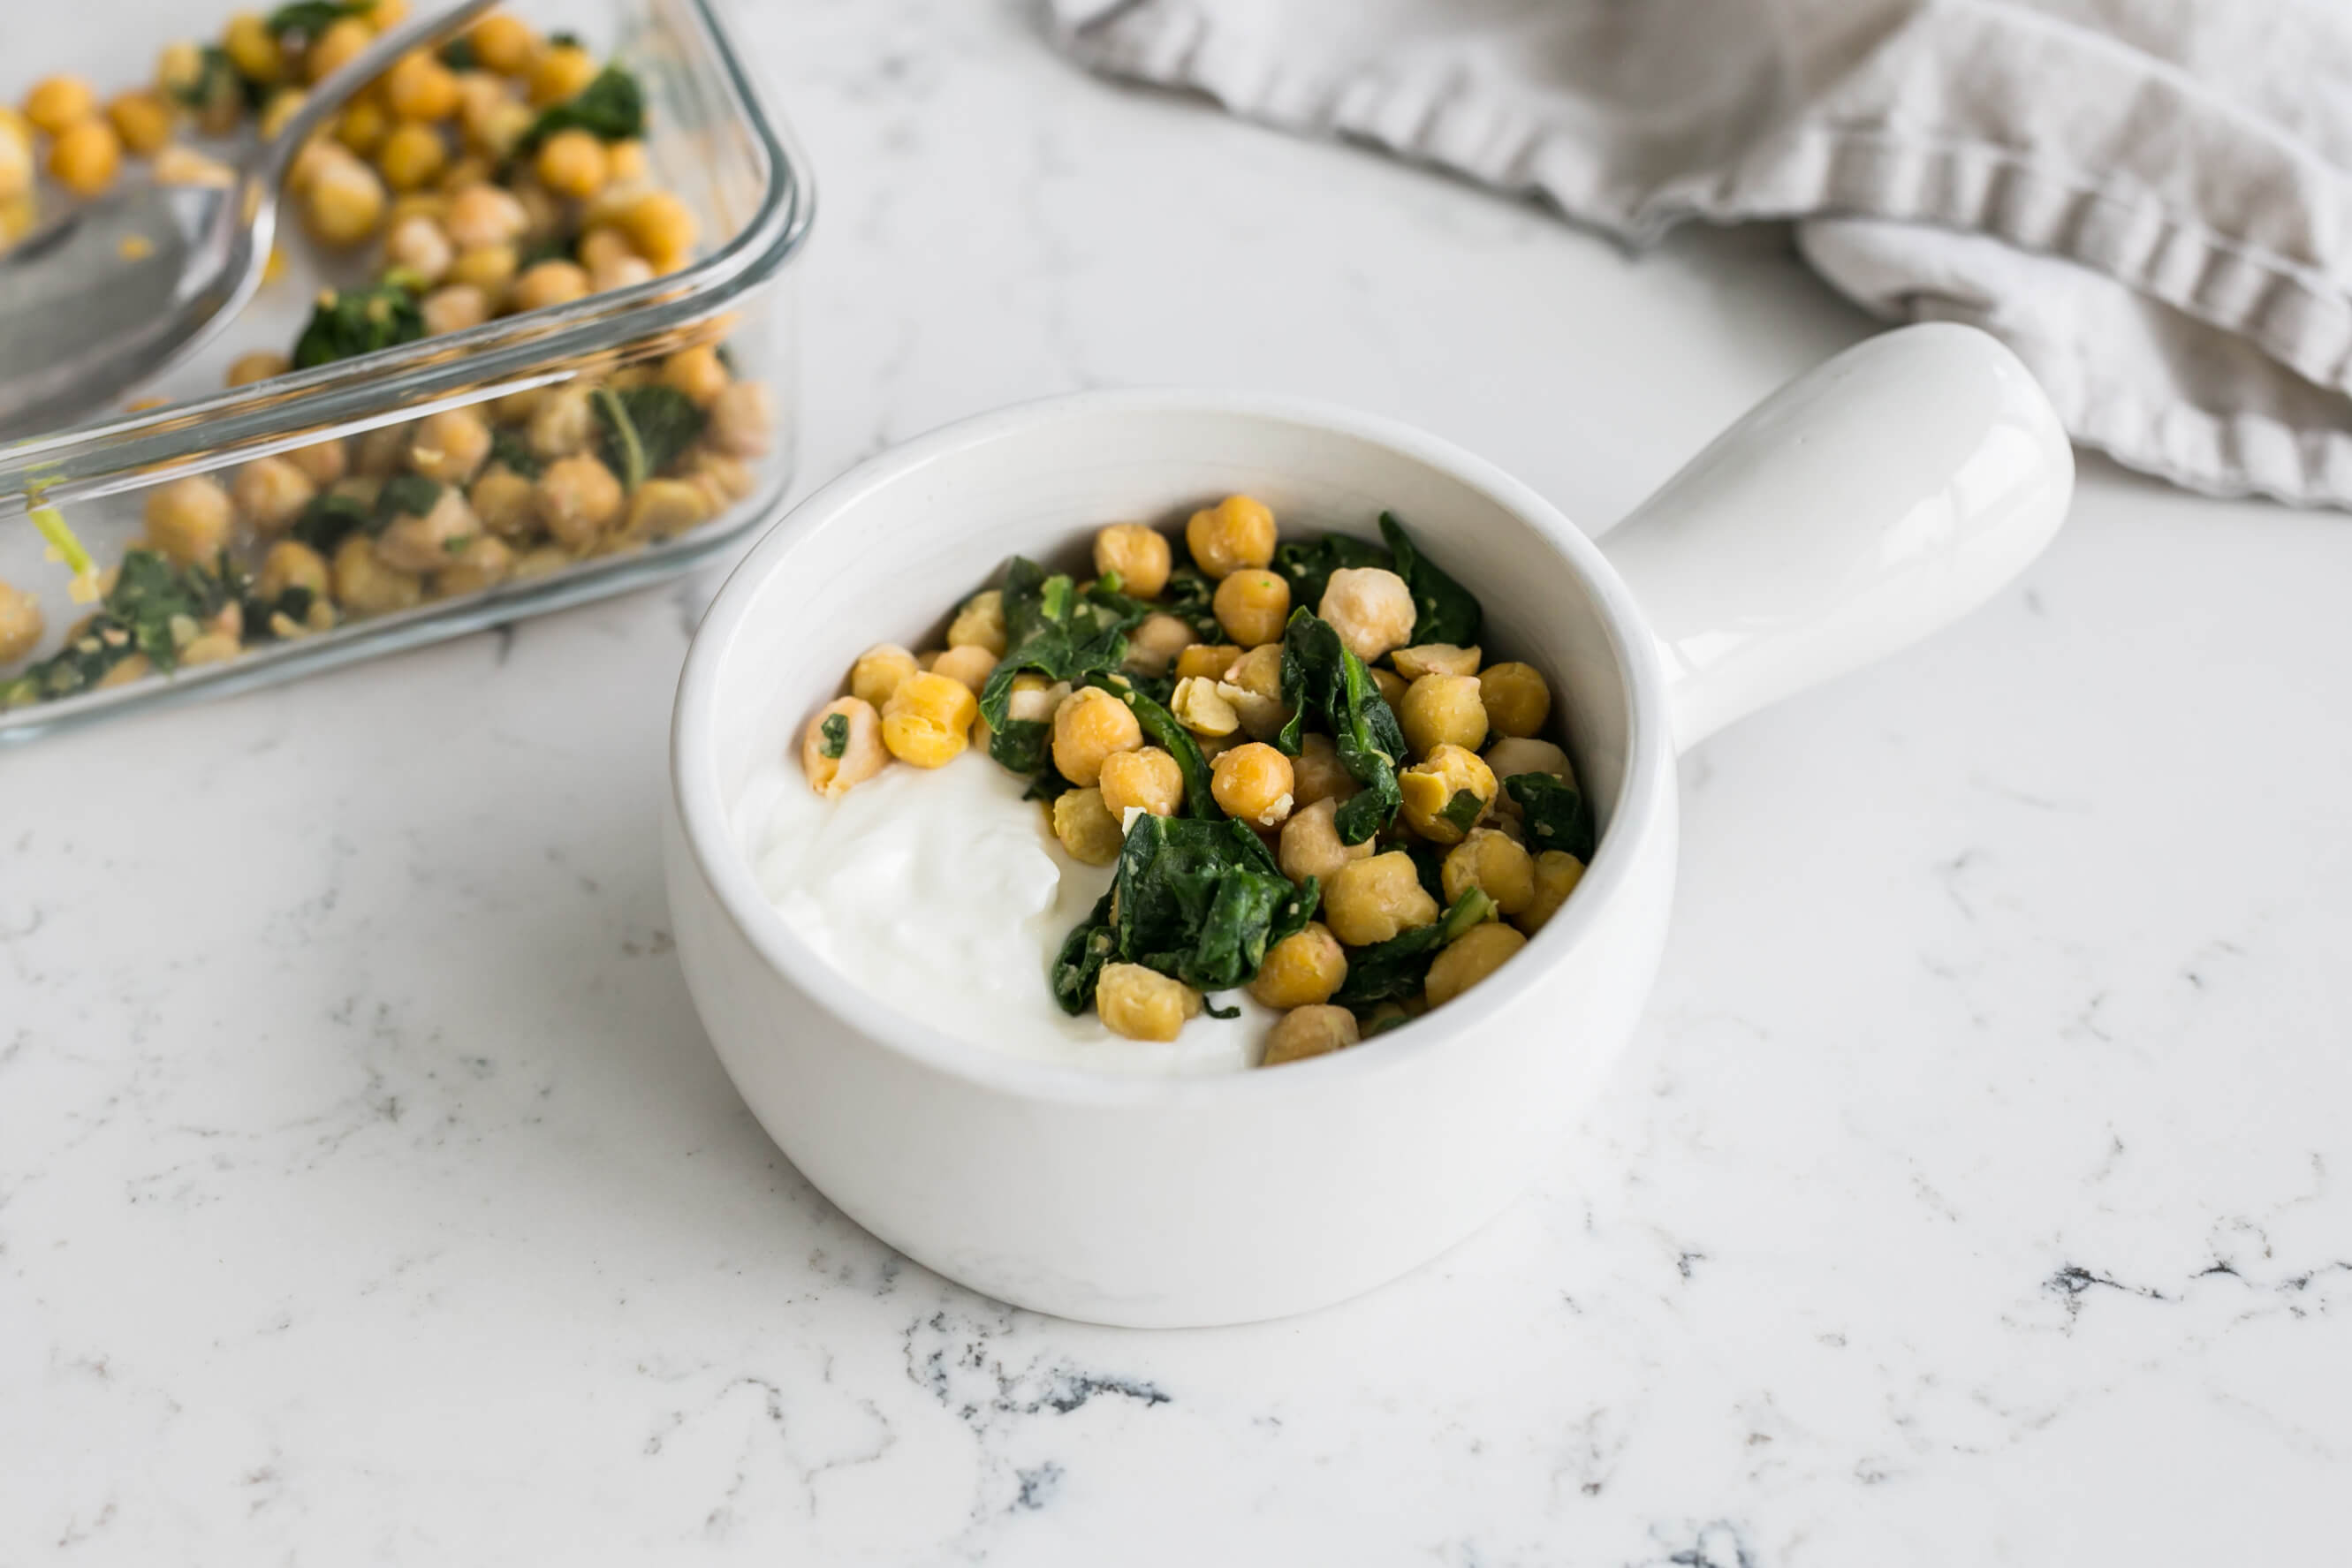 20 Healthy Meals to Help Your Clients Eat Healthy on a Tight Budget: Fried Chickpeas & Spinach Yogurt Bowl